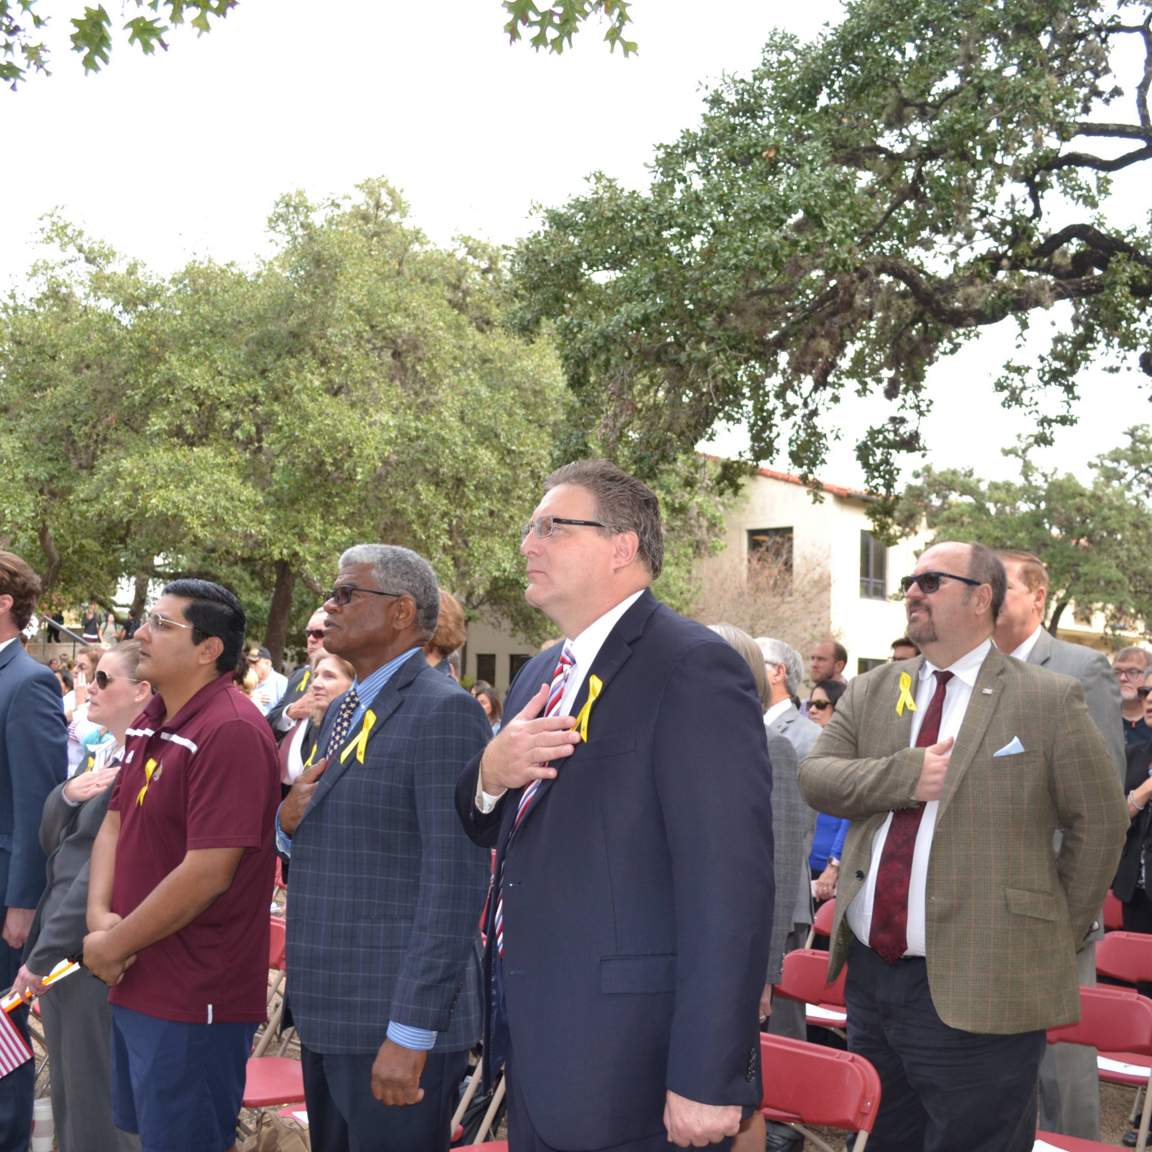 Veterans, Faculty and Guests stand for the National Anthem